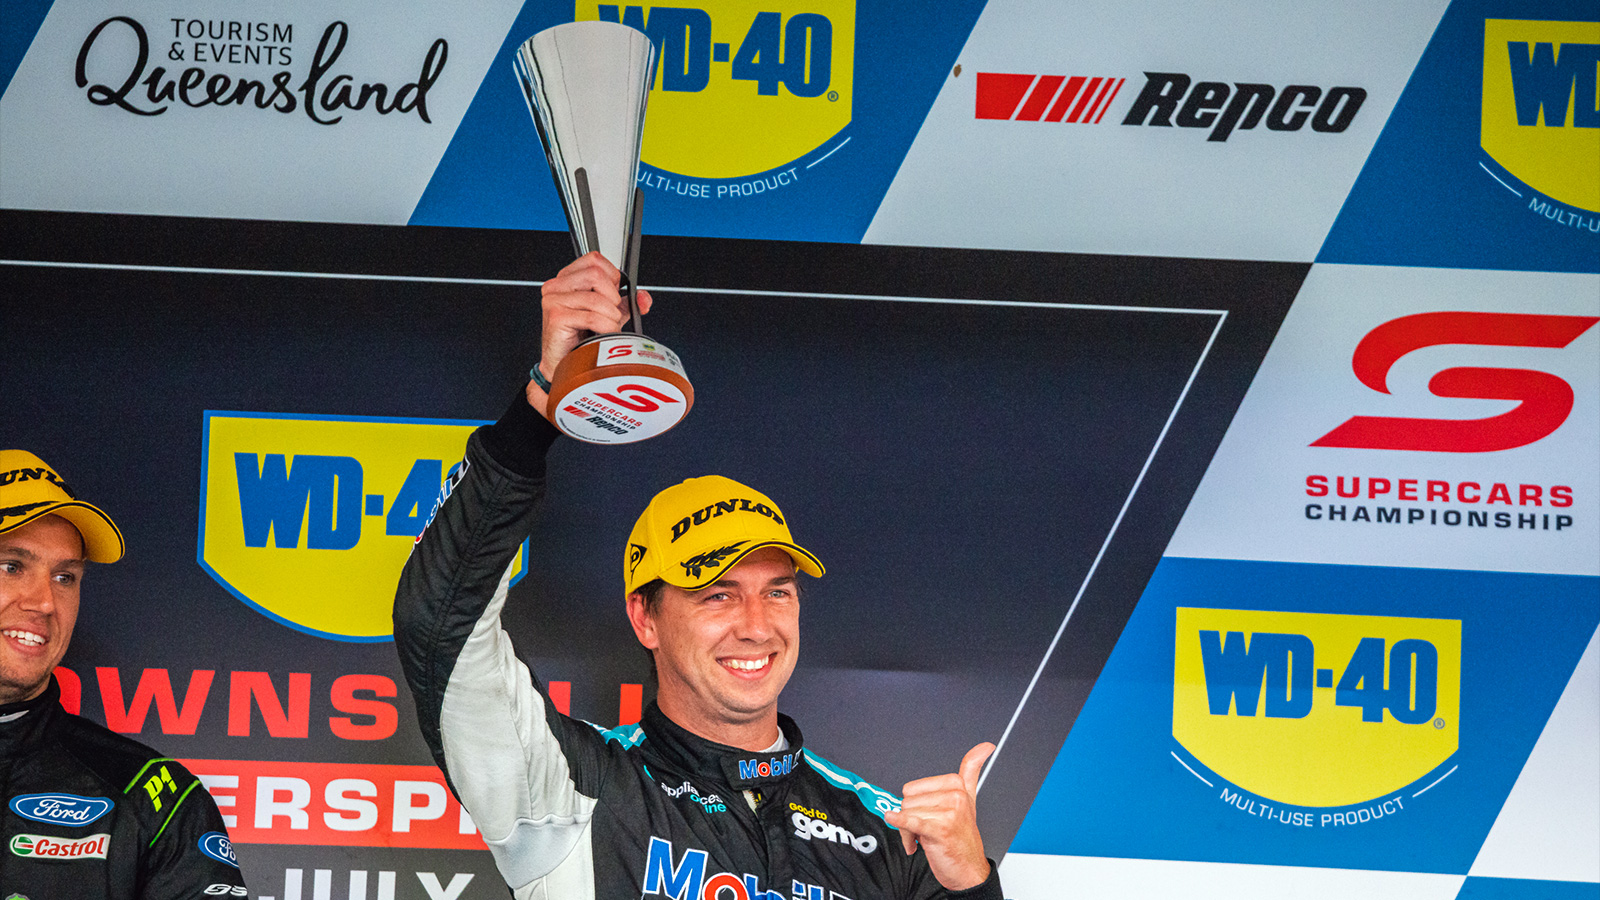 Mostert claimed his 6th podium of 2021.